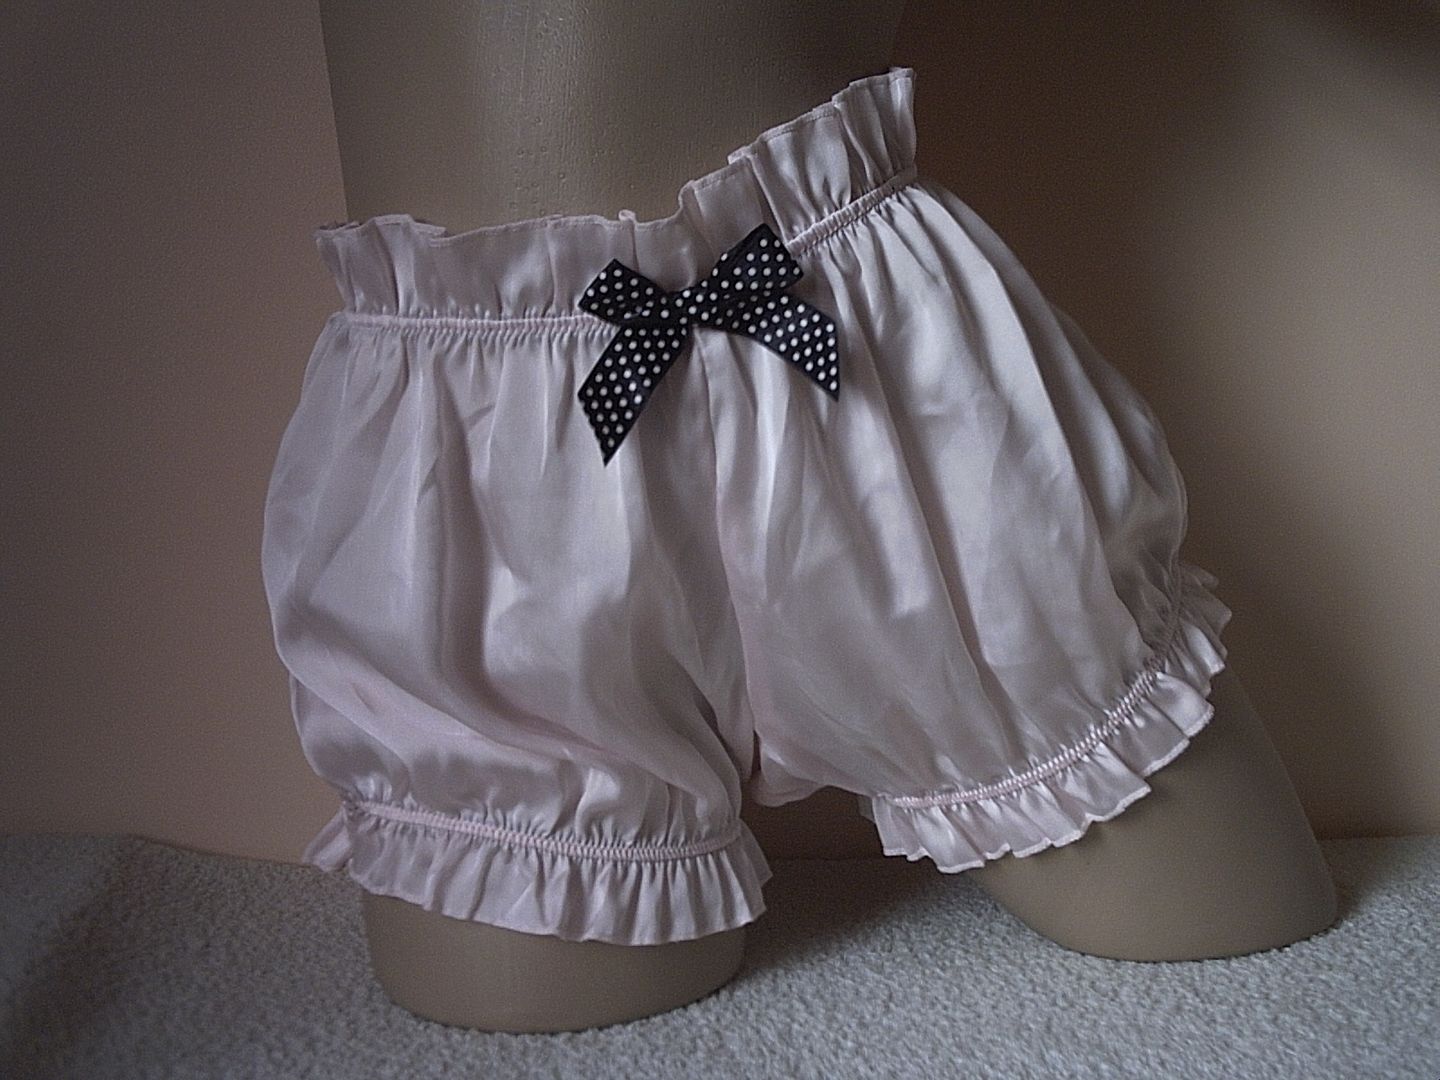 Cute Baby Pink Satin Bloomers Style Shorty Panties Frilly Knickers M